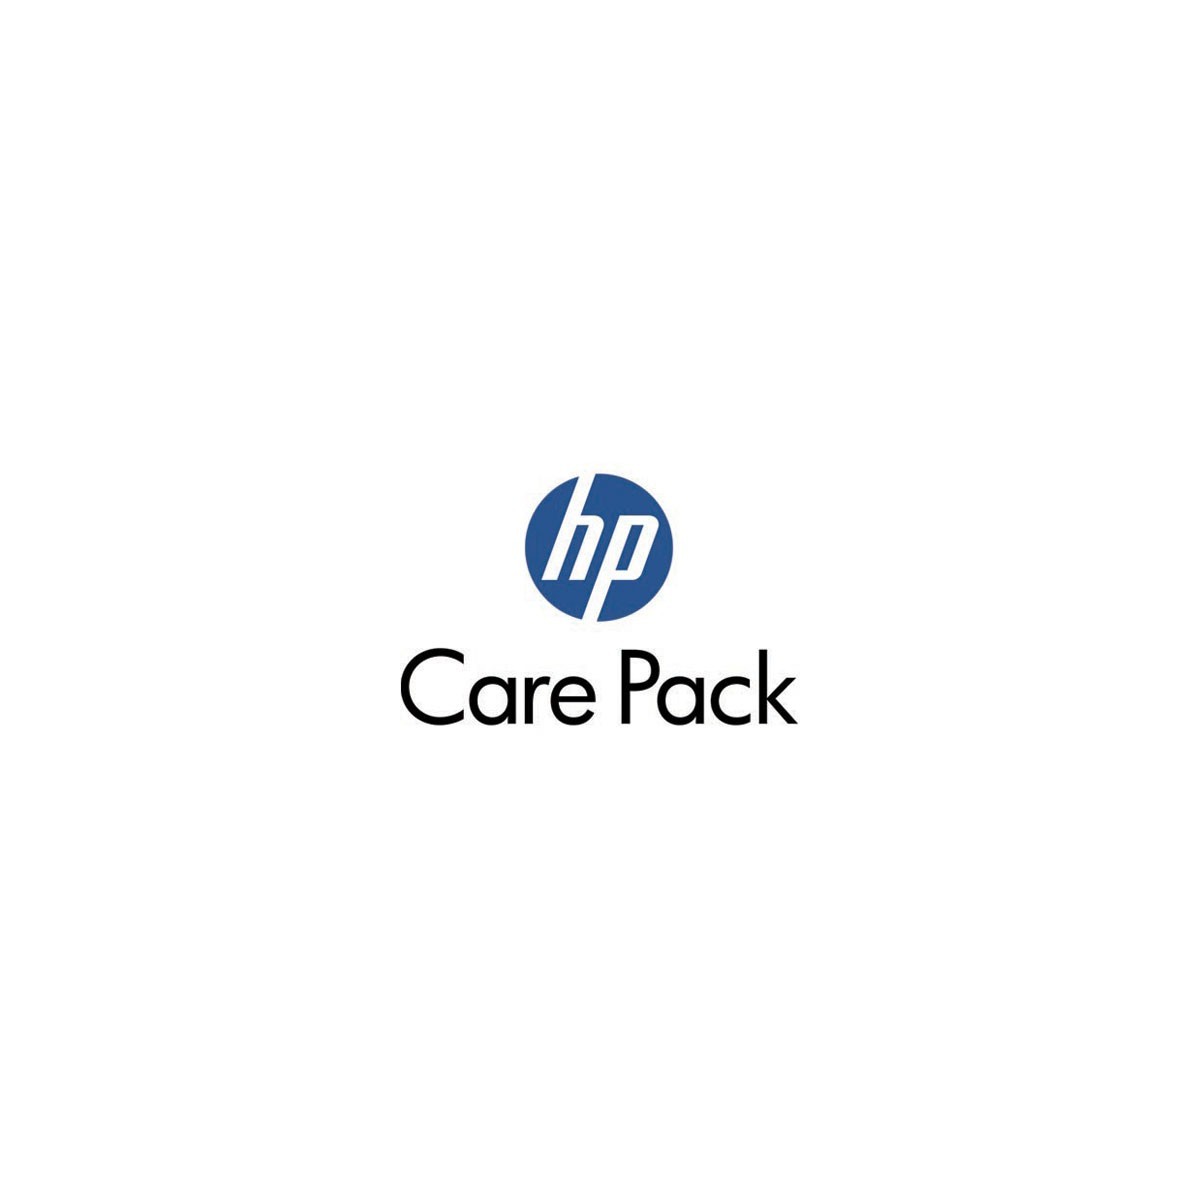 HPE Care Pack Electronic HP Care Pack Installation Service - Systems Service  Support